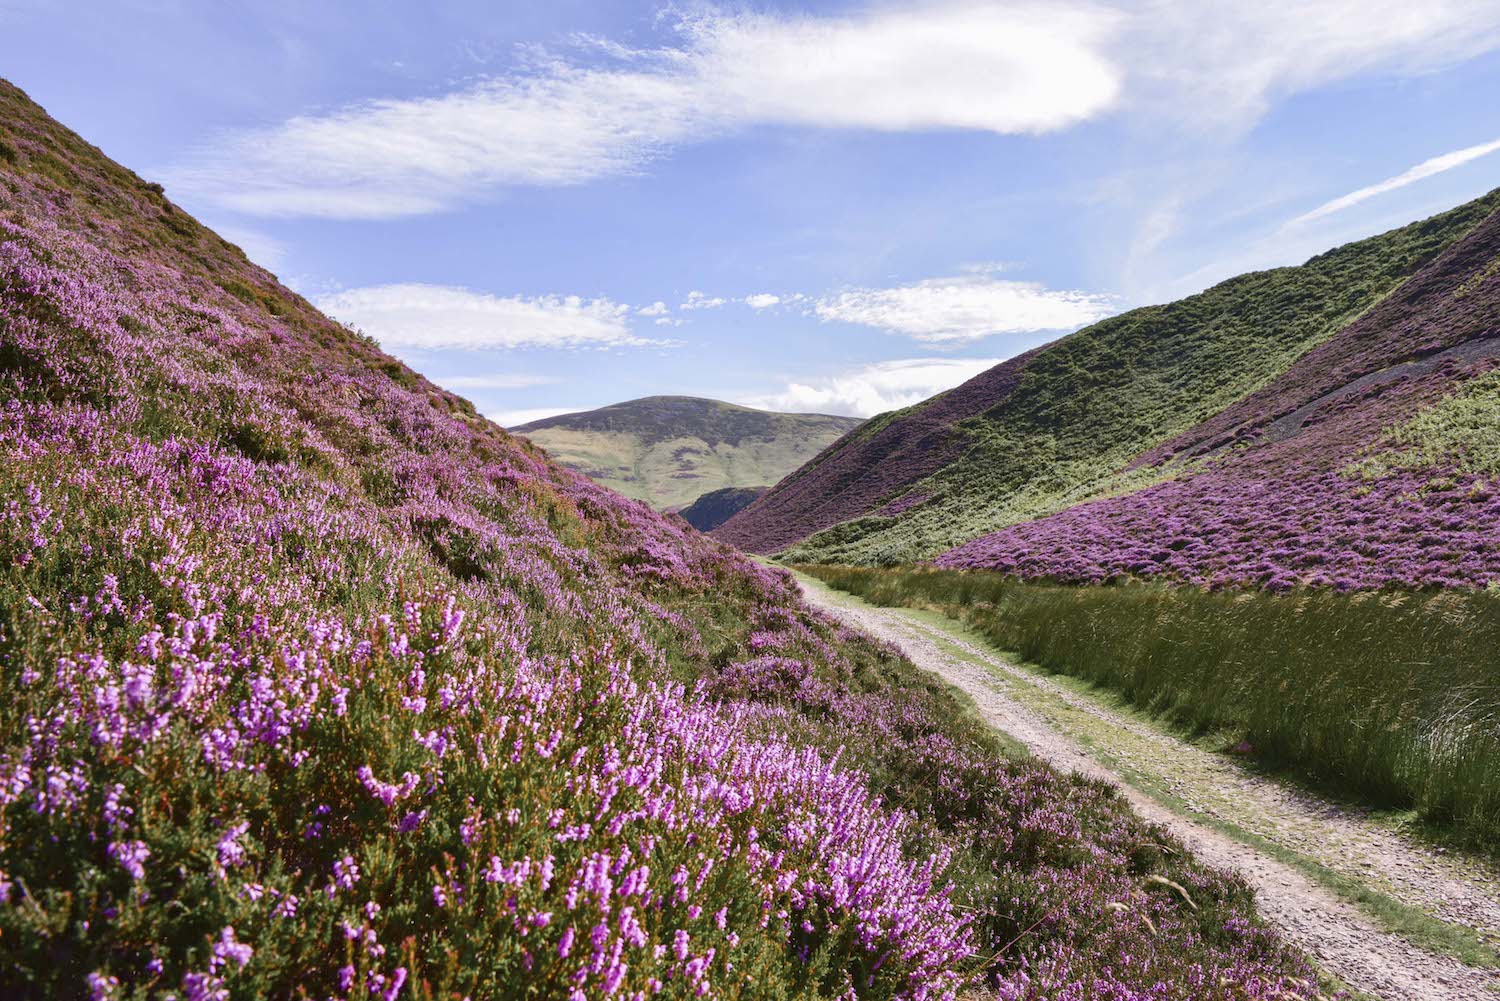 Spectacular Images Depict Beautiful Heather Blooms Across Picturesque ...